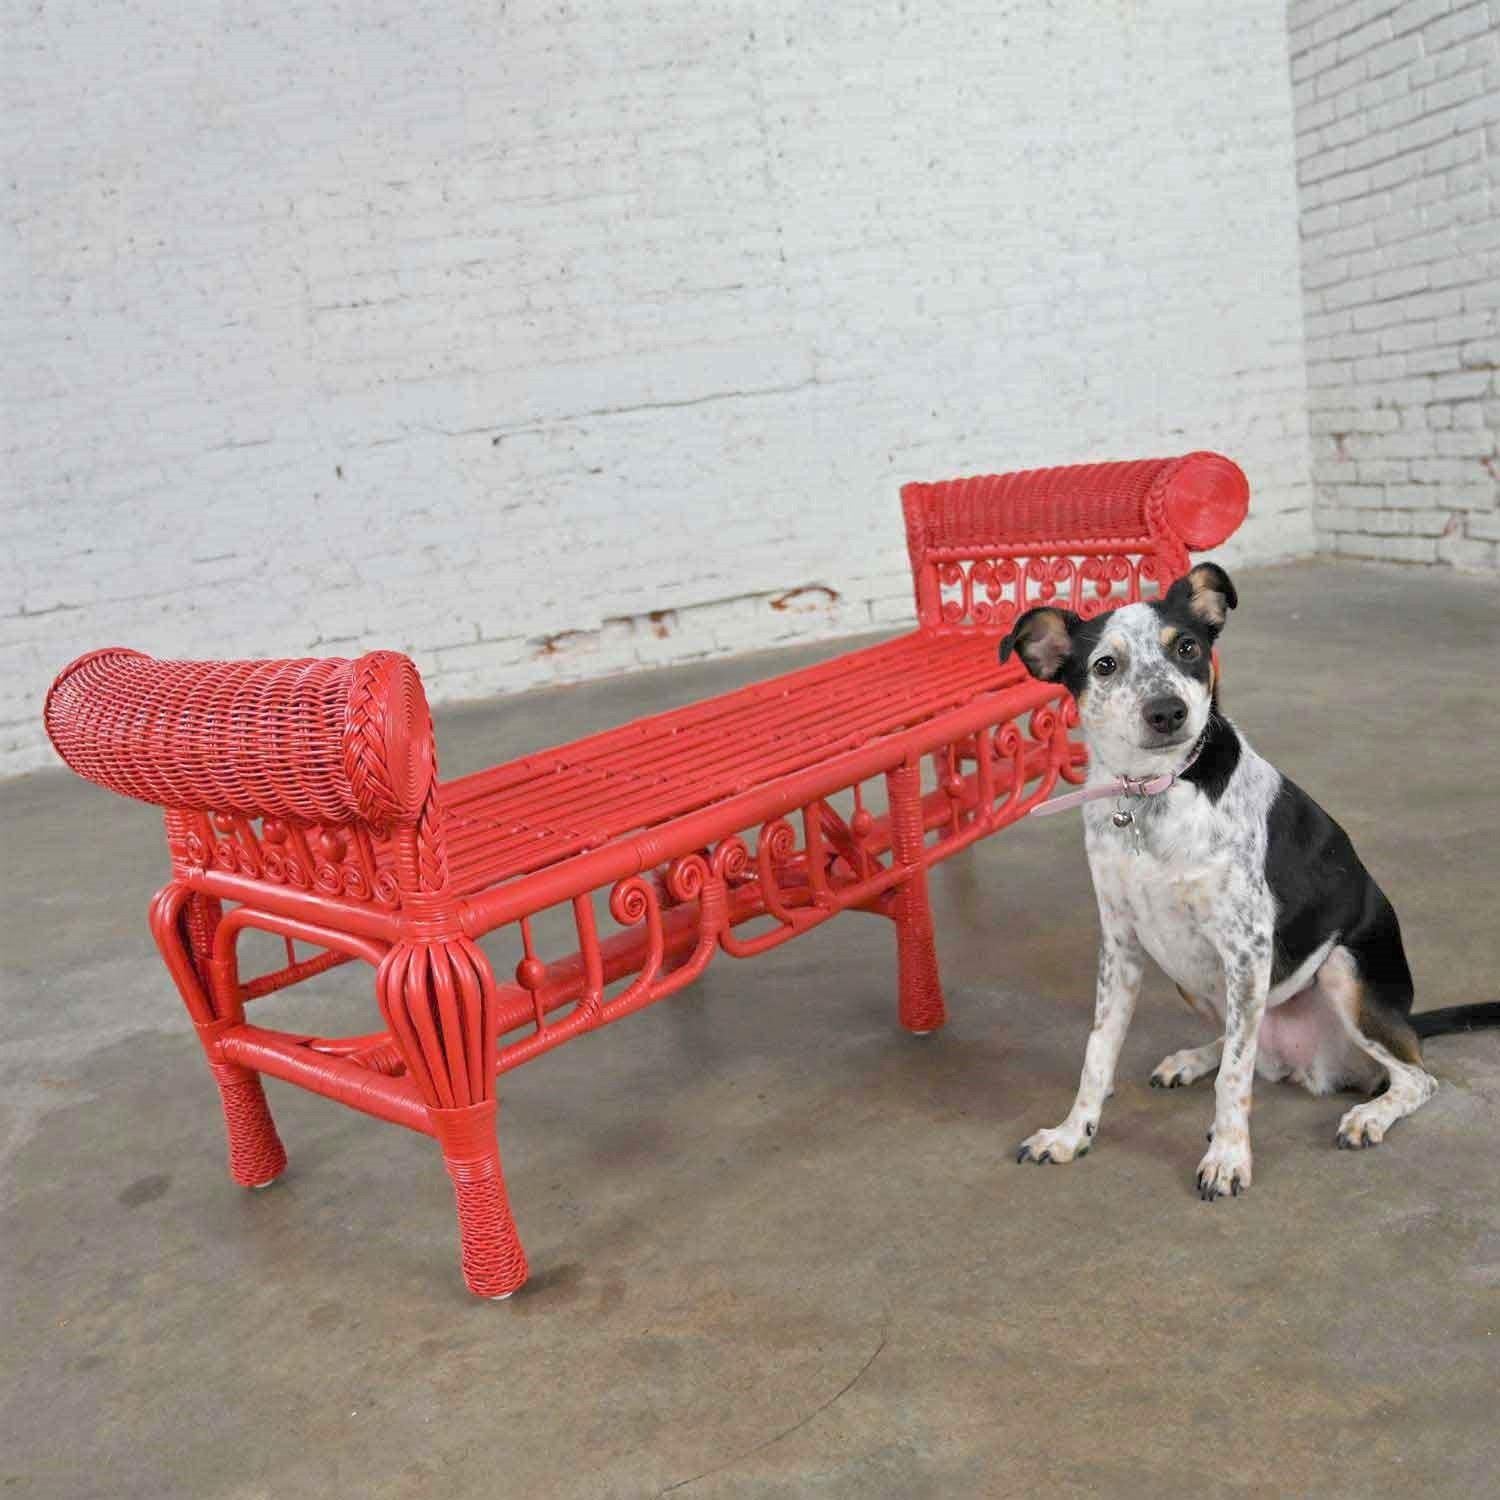 Amazing Hollywood Regency boho chic poppy red painted gondola style wicker bench or make it a table. Beautiful condition, keeping in mind that this is vintage and not new so will have signs of use and wear. This has been totally repainted by our